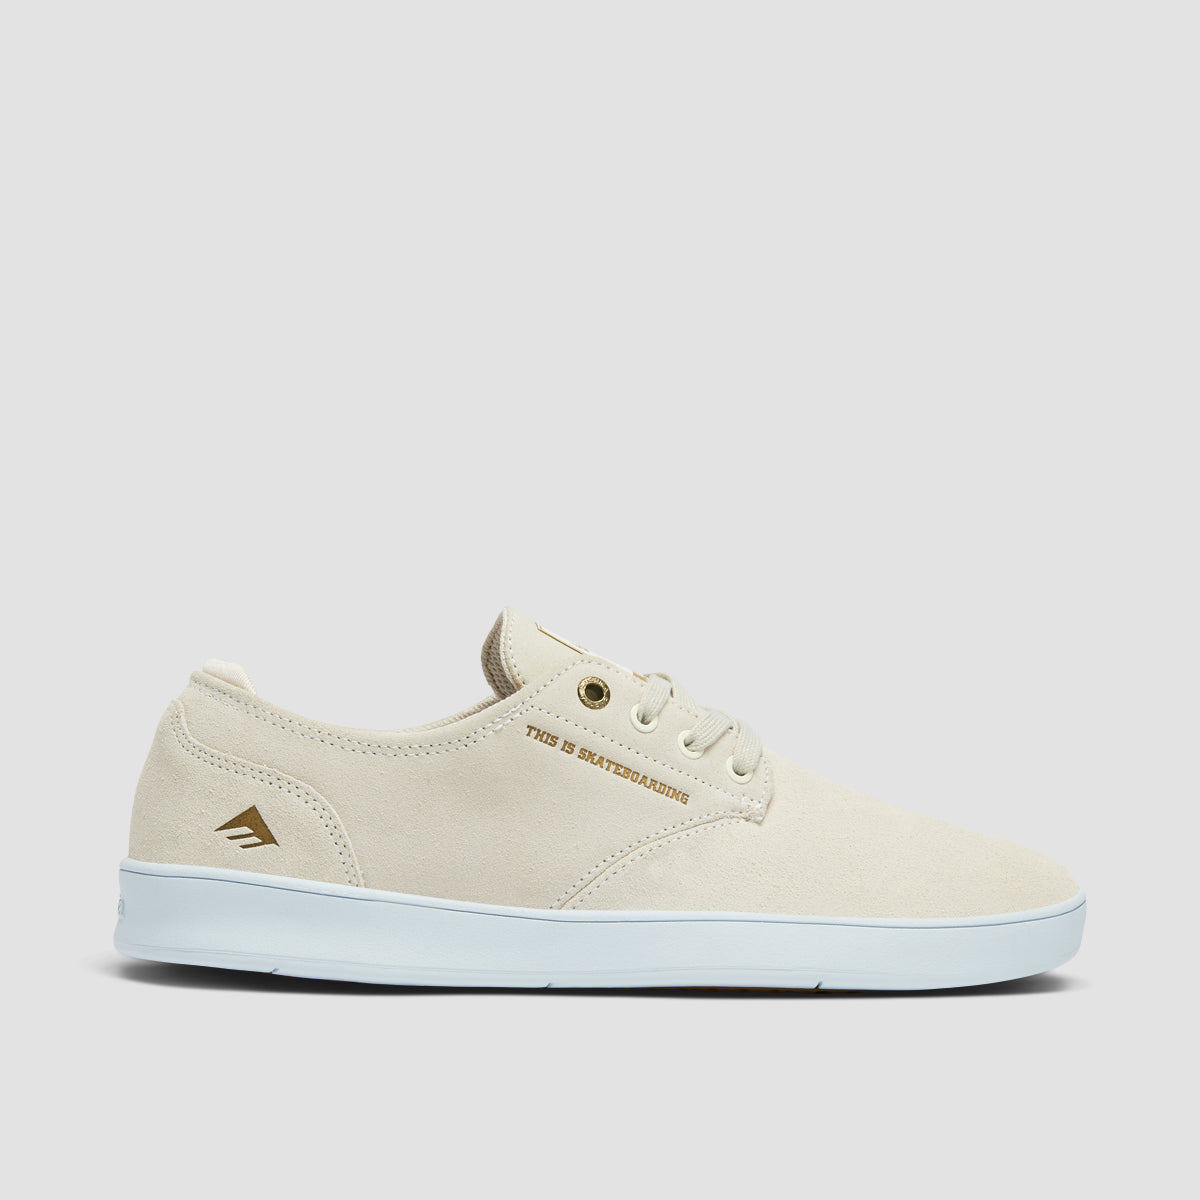 Emerica Romero Laced X This Is Skateboarding Shoes - White